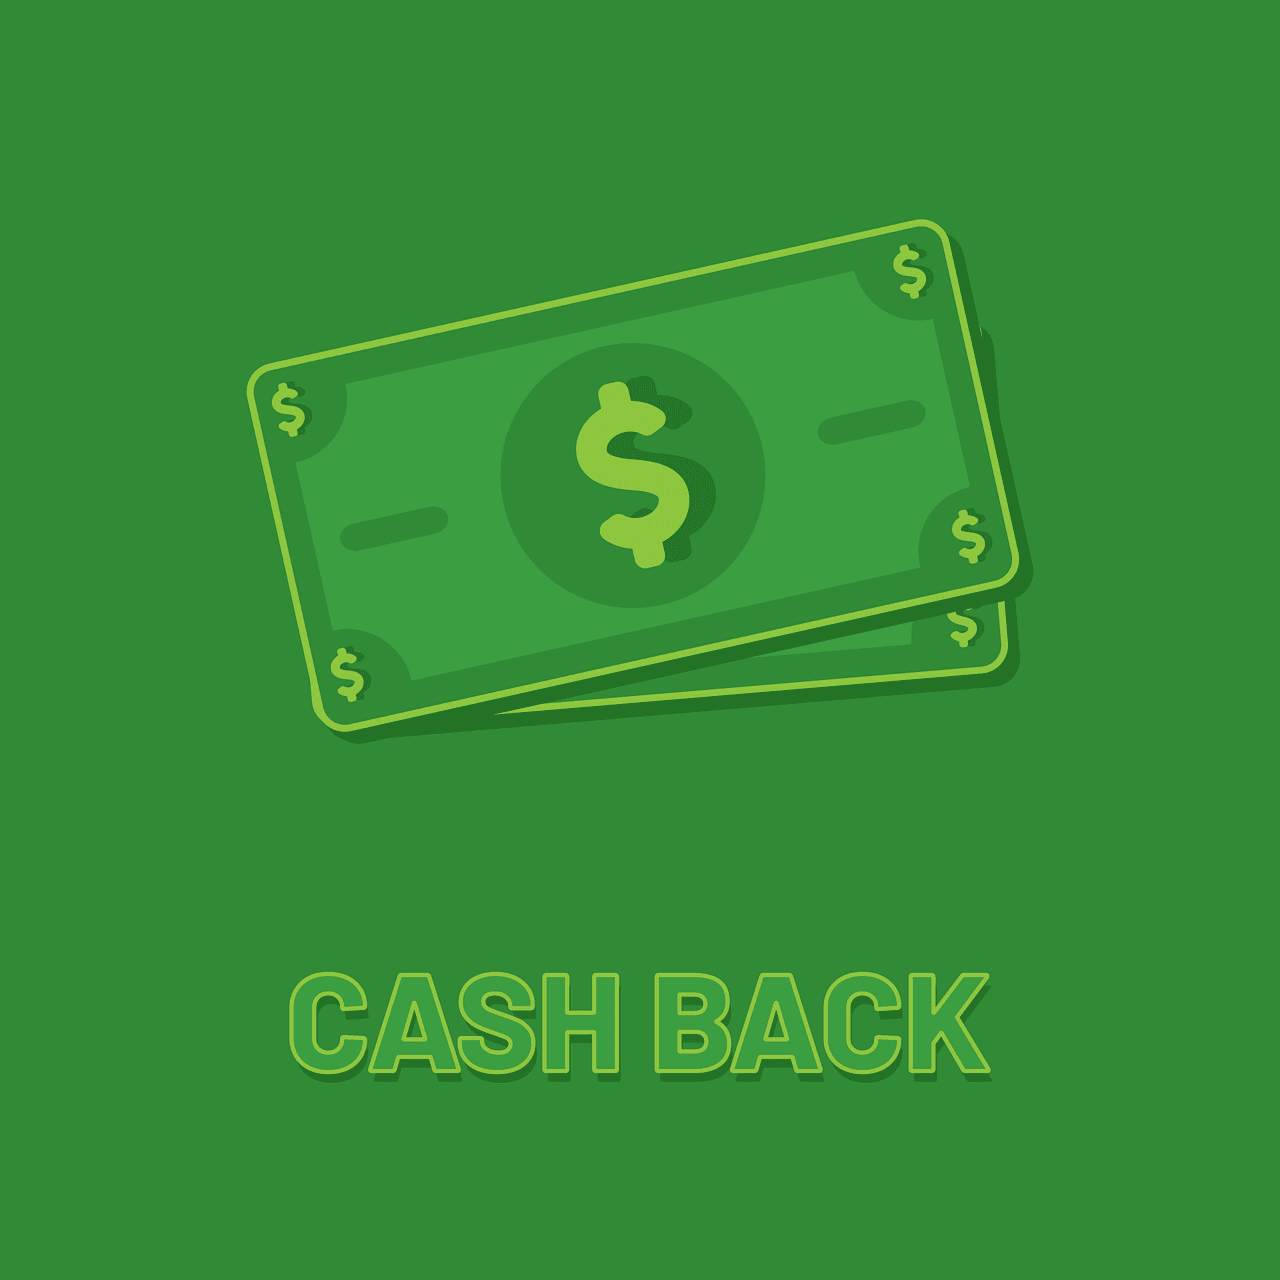 Free cash back money from one of your popular bank now